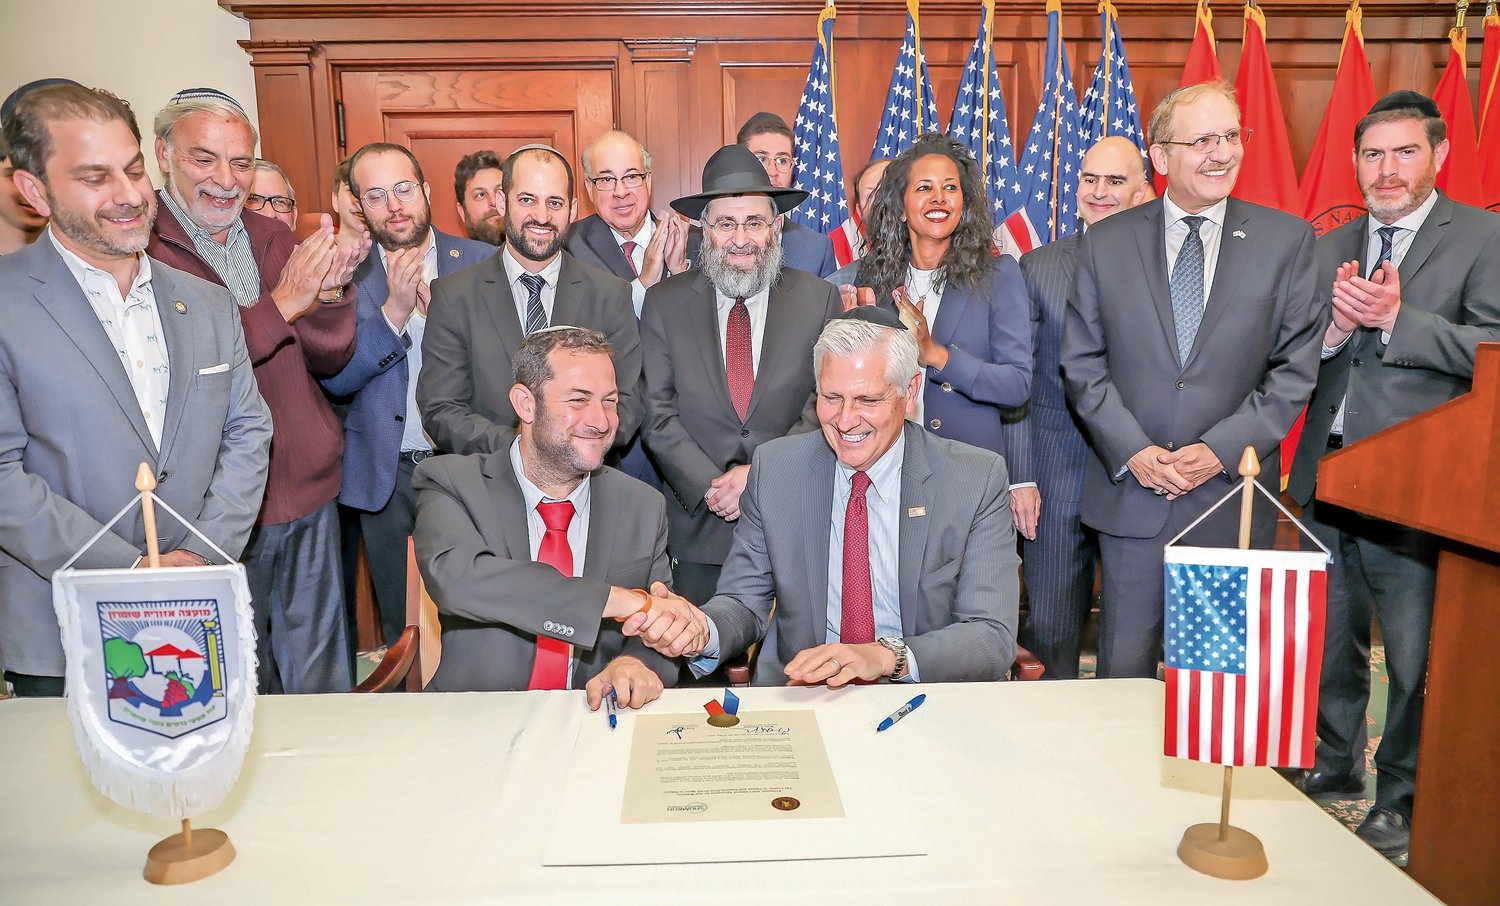 It was all smiles and friendship for Shomron Regional Council chair Yossi Dagan and Nassau County Executive Bruce Blakeman after signing an economic and cultural agreement between the two ‘sister’ regions. Joining them were, at far left, Assemblyman Ari Brown, and former Boro Park Assemblyman Dov Hikind, Rabbi Anchelle Perl of Chabad of Mineola, and County Legislator Mazi Melesa Pilip.